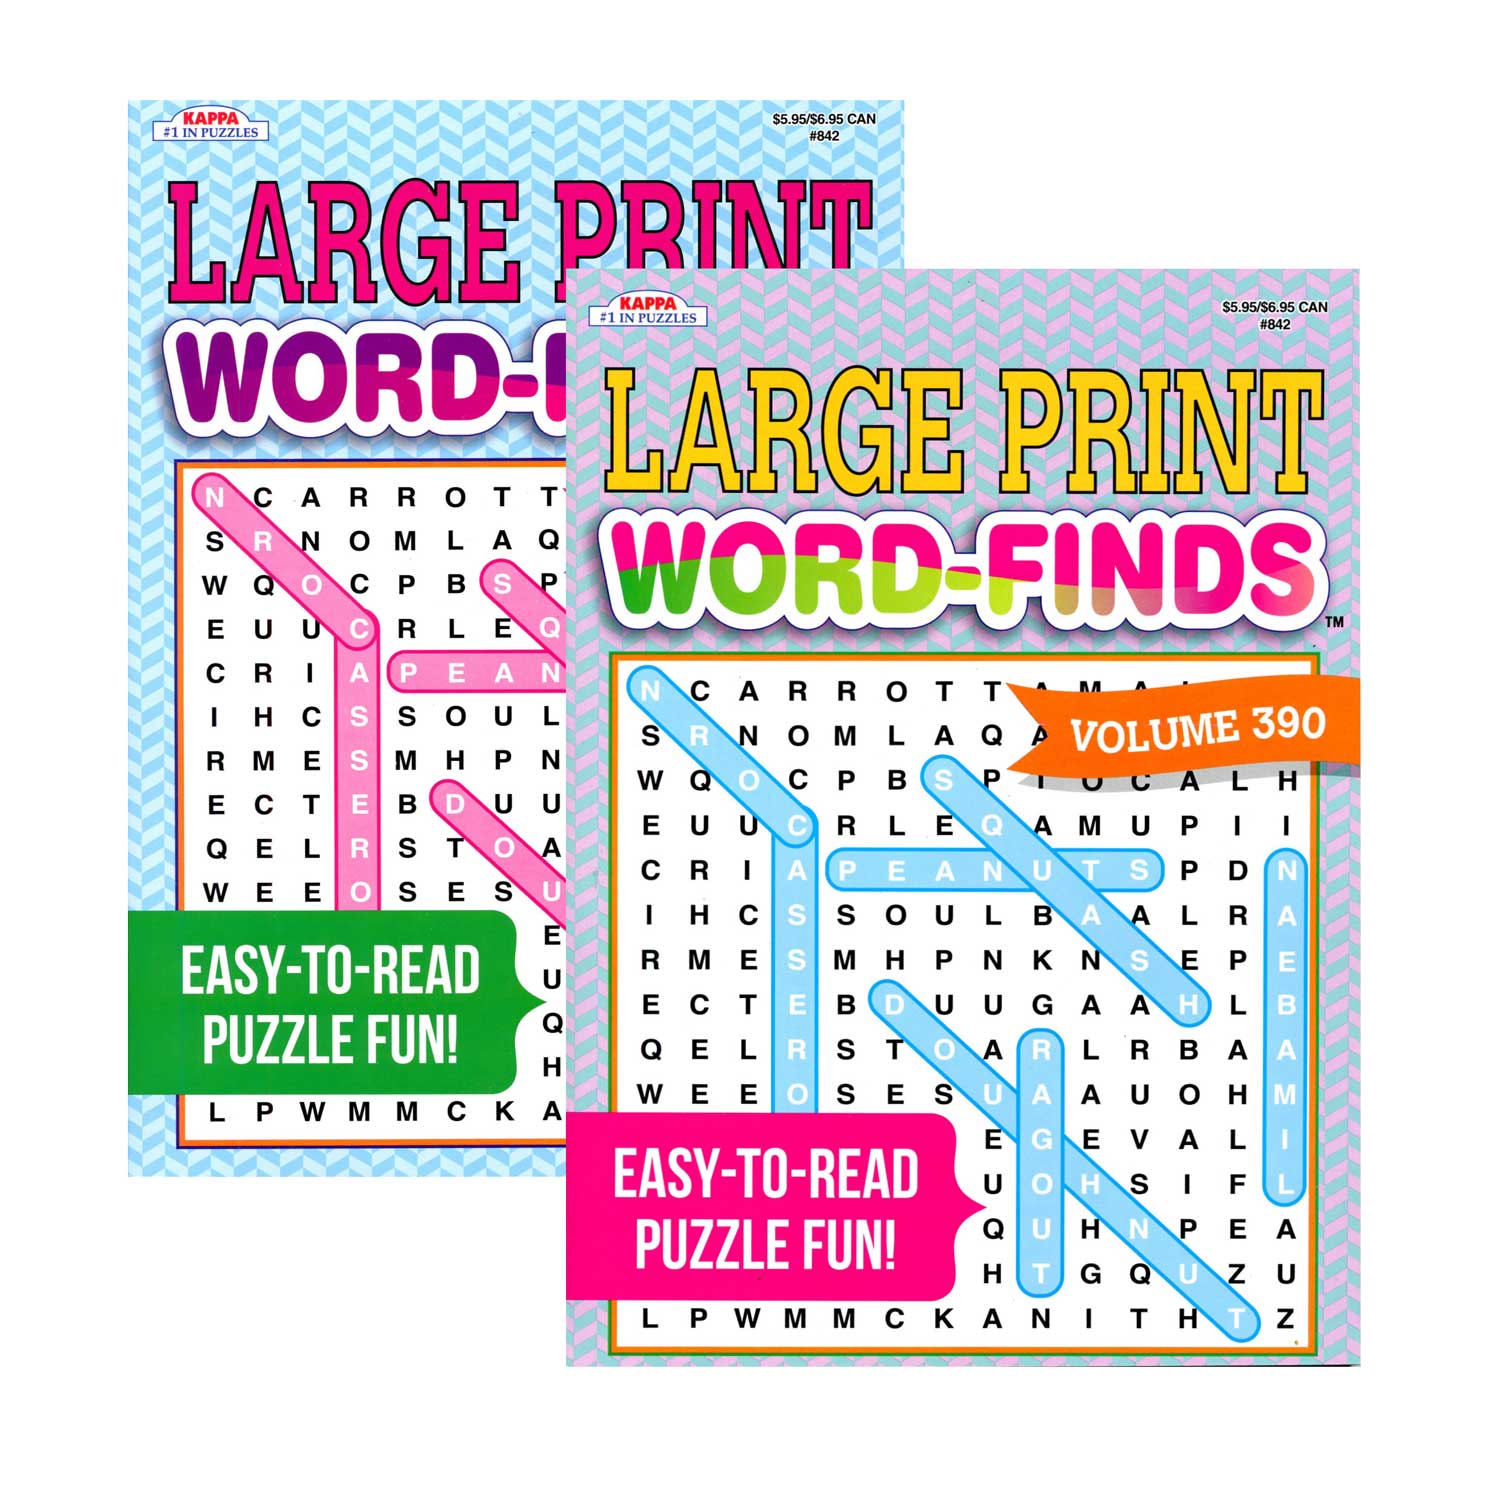 Puzzle Book | KAPPA Large Print Word Finds | 2-Titles